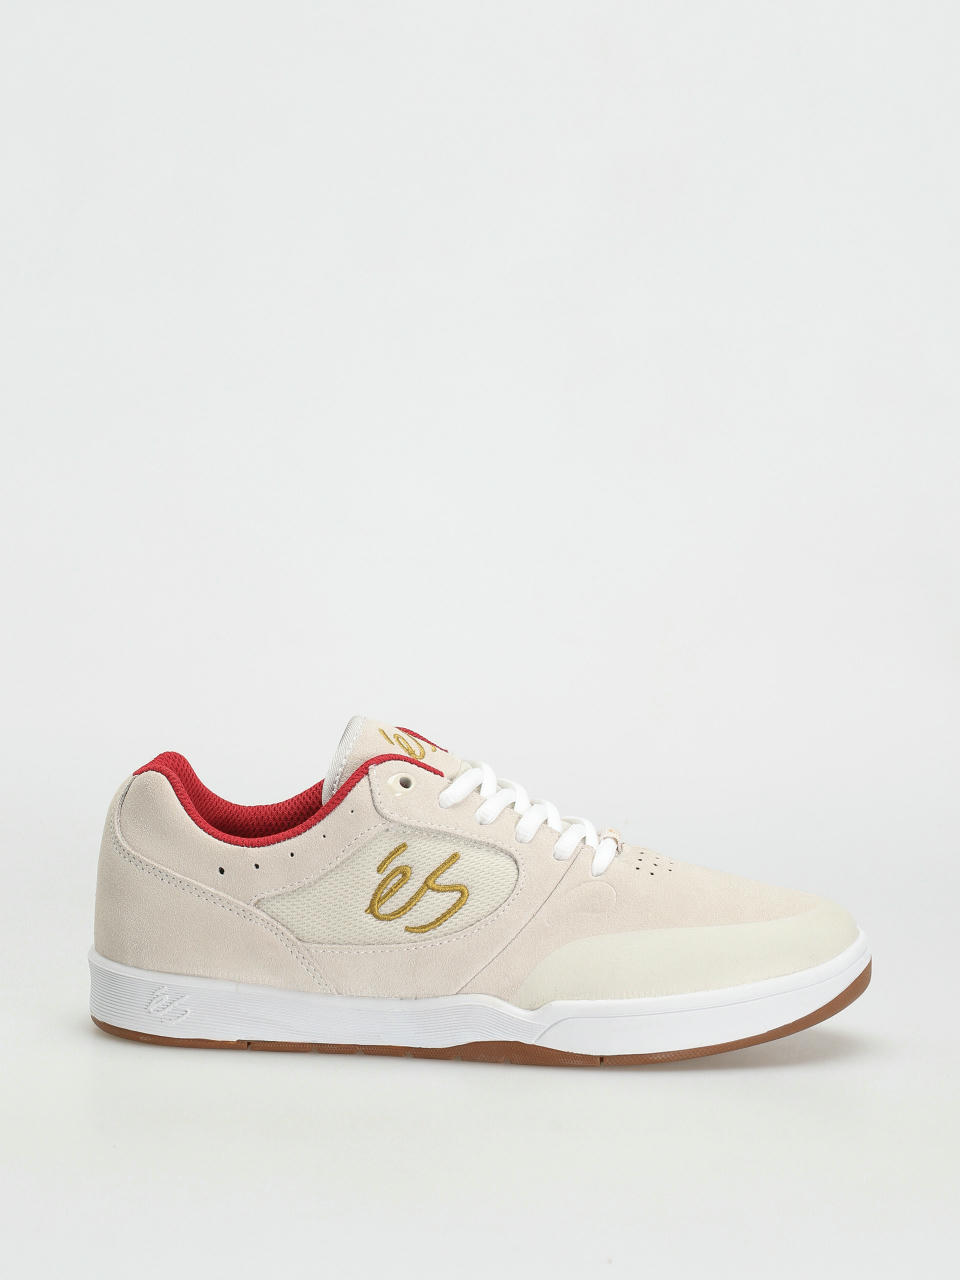 Topánky eS Swift 1.5 (white/red/gum)